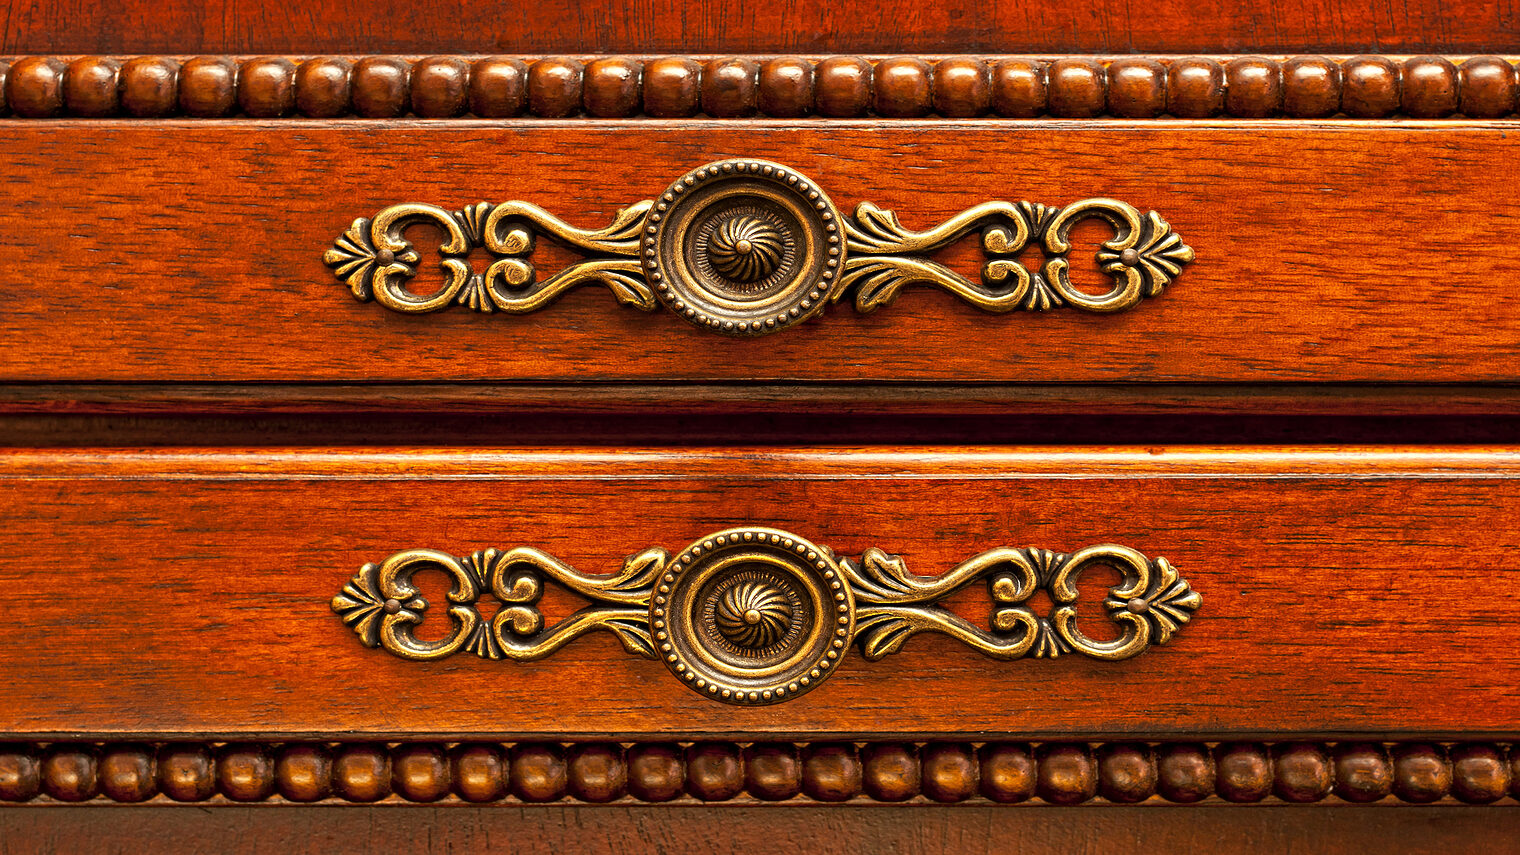 Ornate handles on wooden cabinet doors closeup Schlagwort(e): handles, cabinet, antique, furniture, hardware, knobs, closeup, brass, door, wooden, ornate, fancy, metal, knob, two, decorative, close, detail, details, round, wood, brown, carpentry, craftsmanship, closed, vintage, cherry, red, luxury, doors, decor, woodworking, stained, finished, design, dresser, storage, old, handle, retro, decoration, interior, decorating, pulls